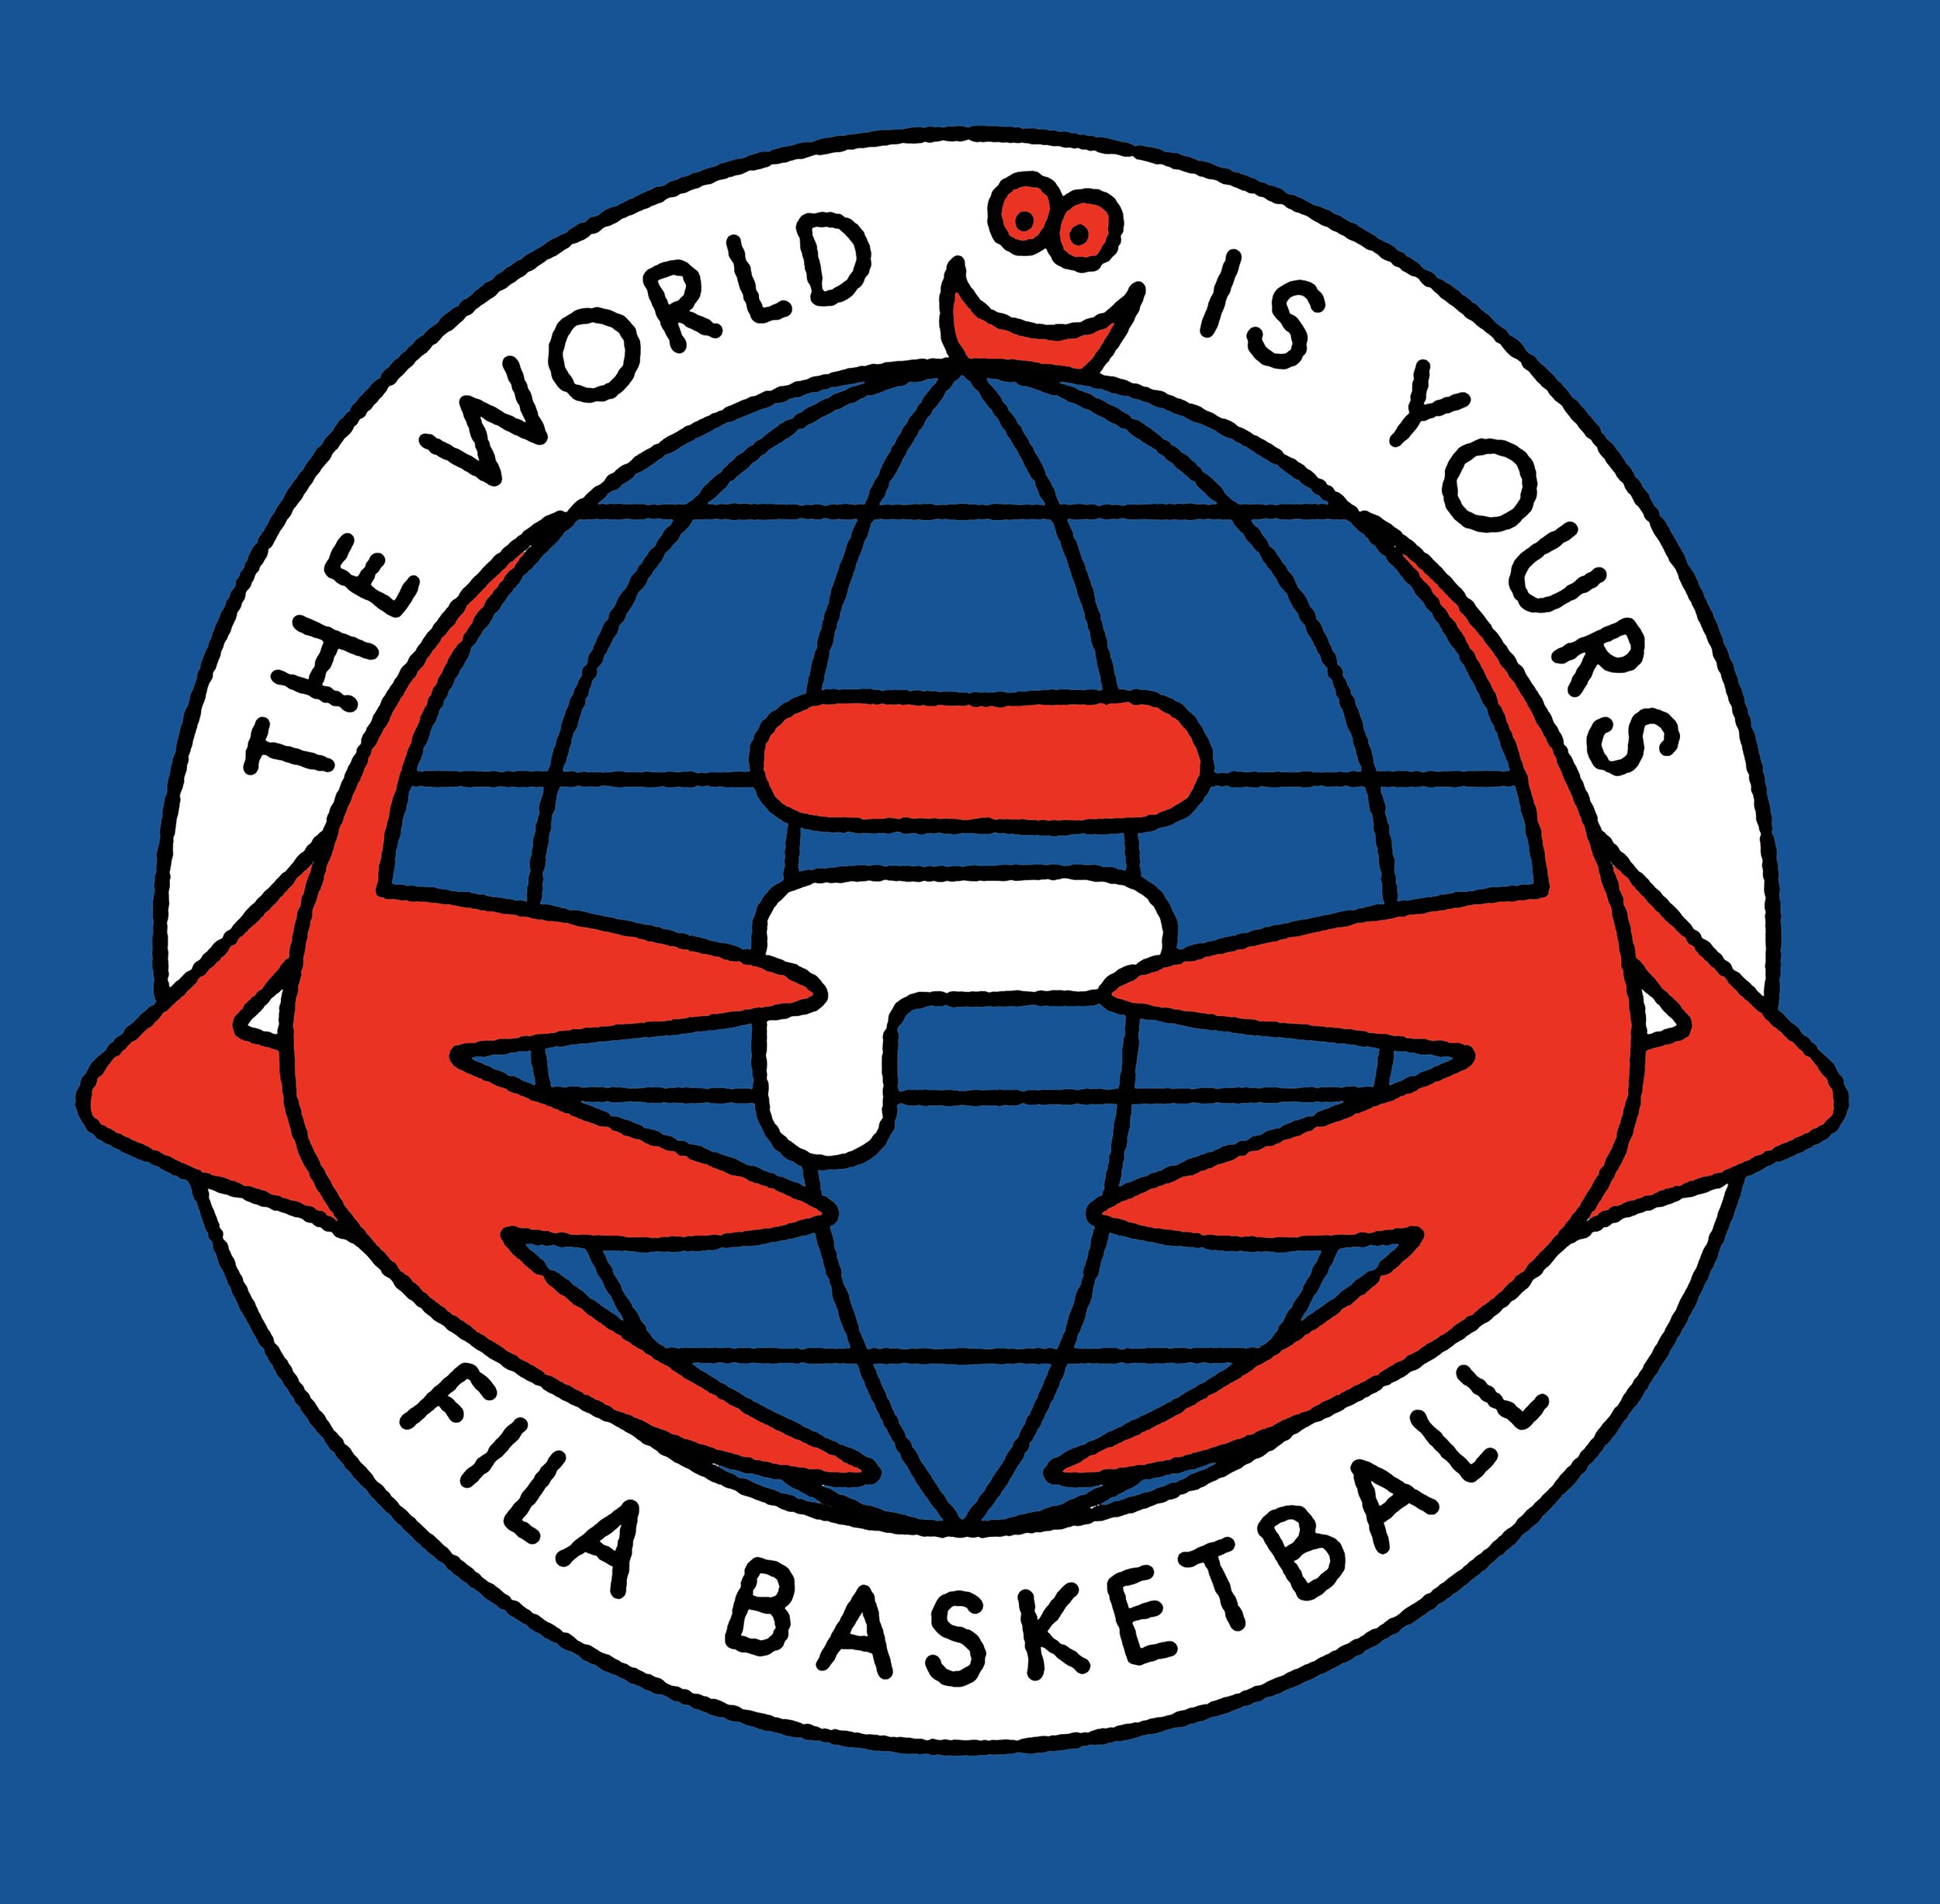 Fila Basketball - The World is Yours